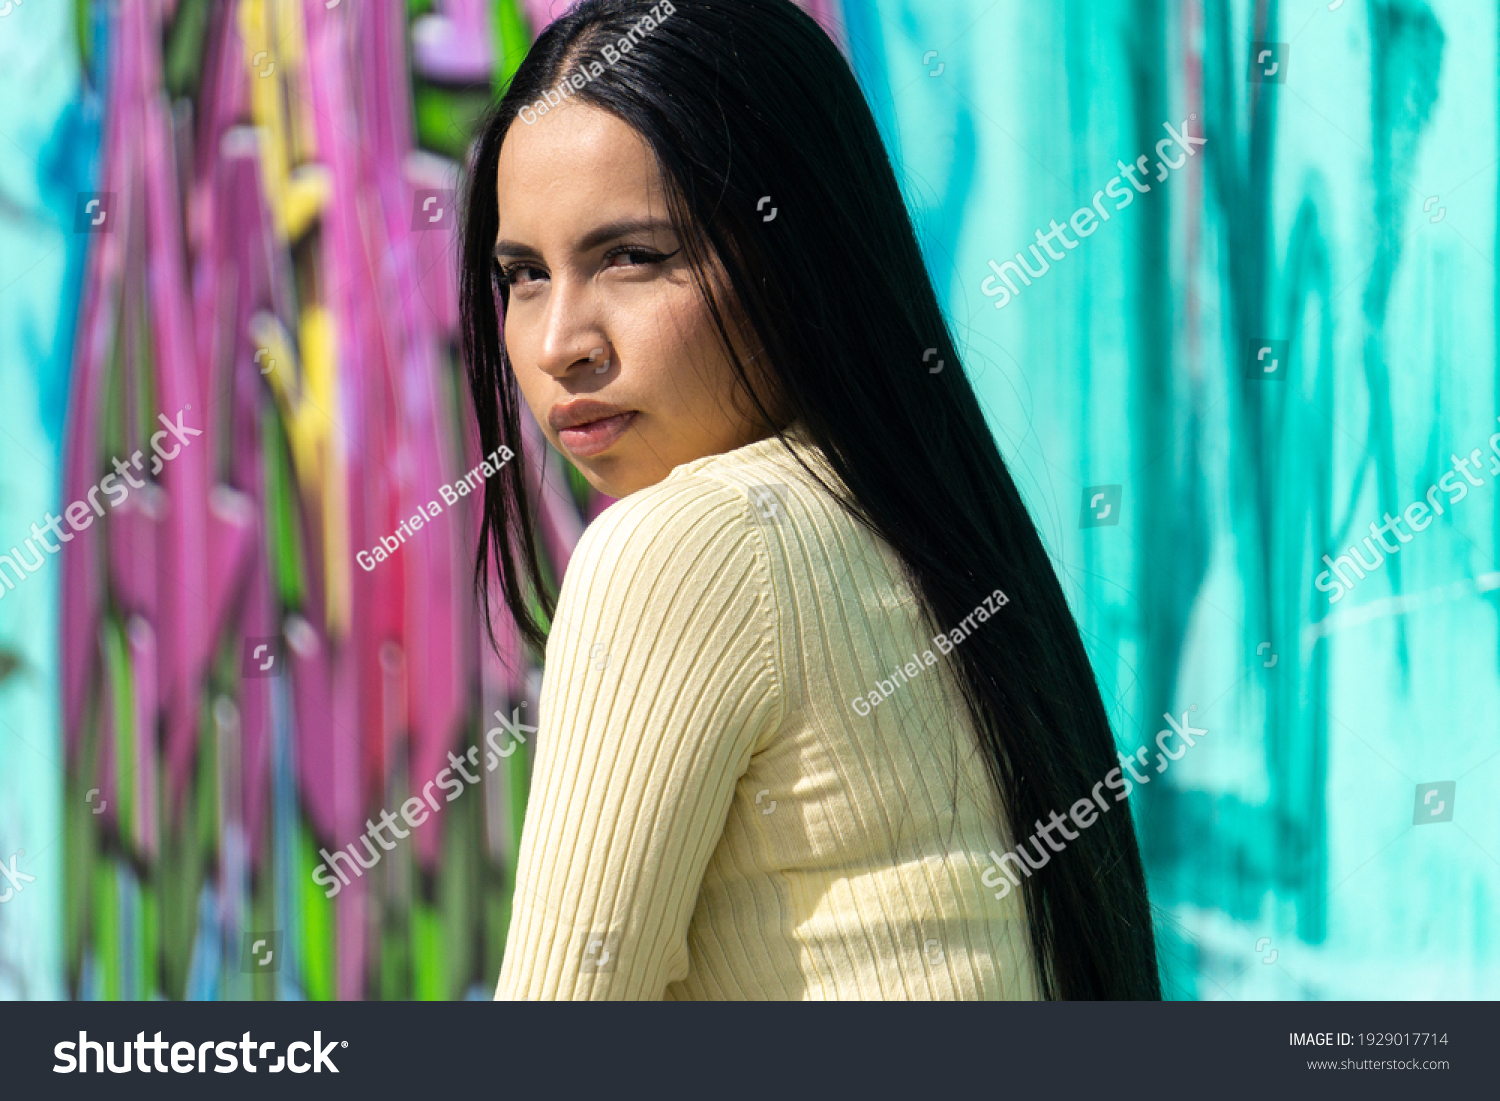 Girl with Long Black Hair - wide 6